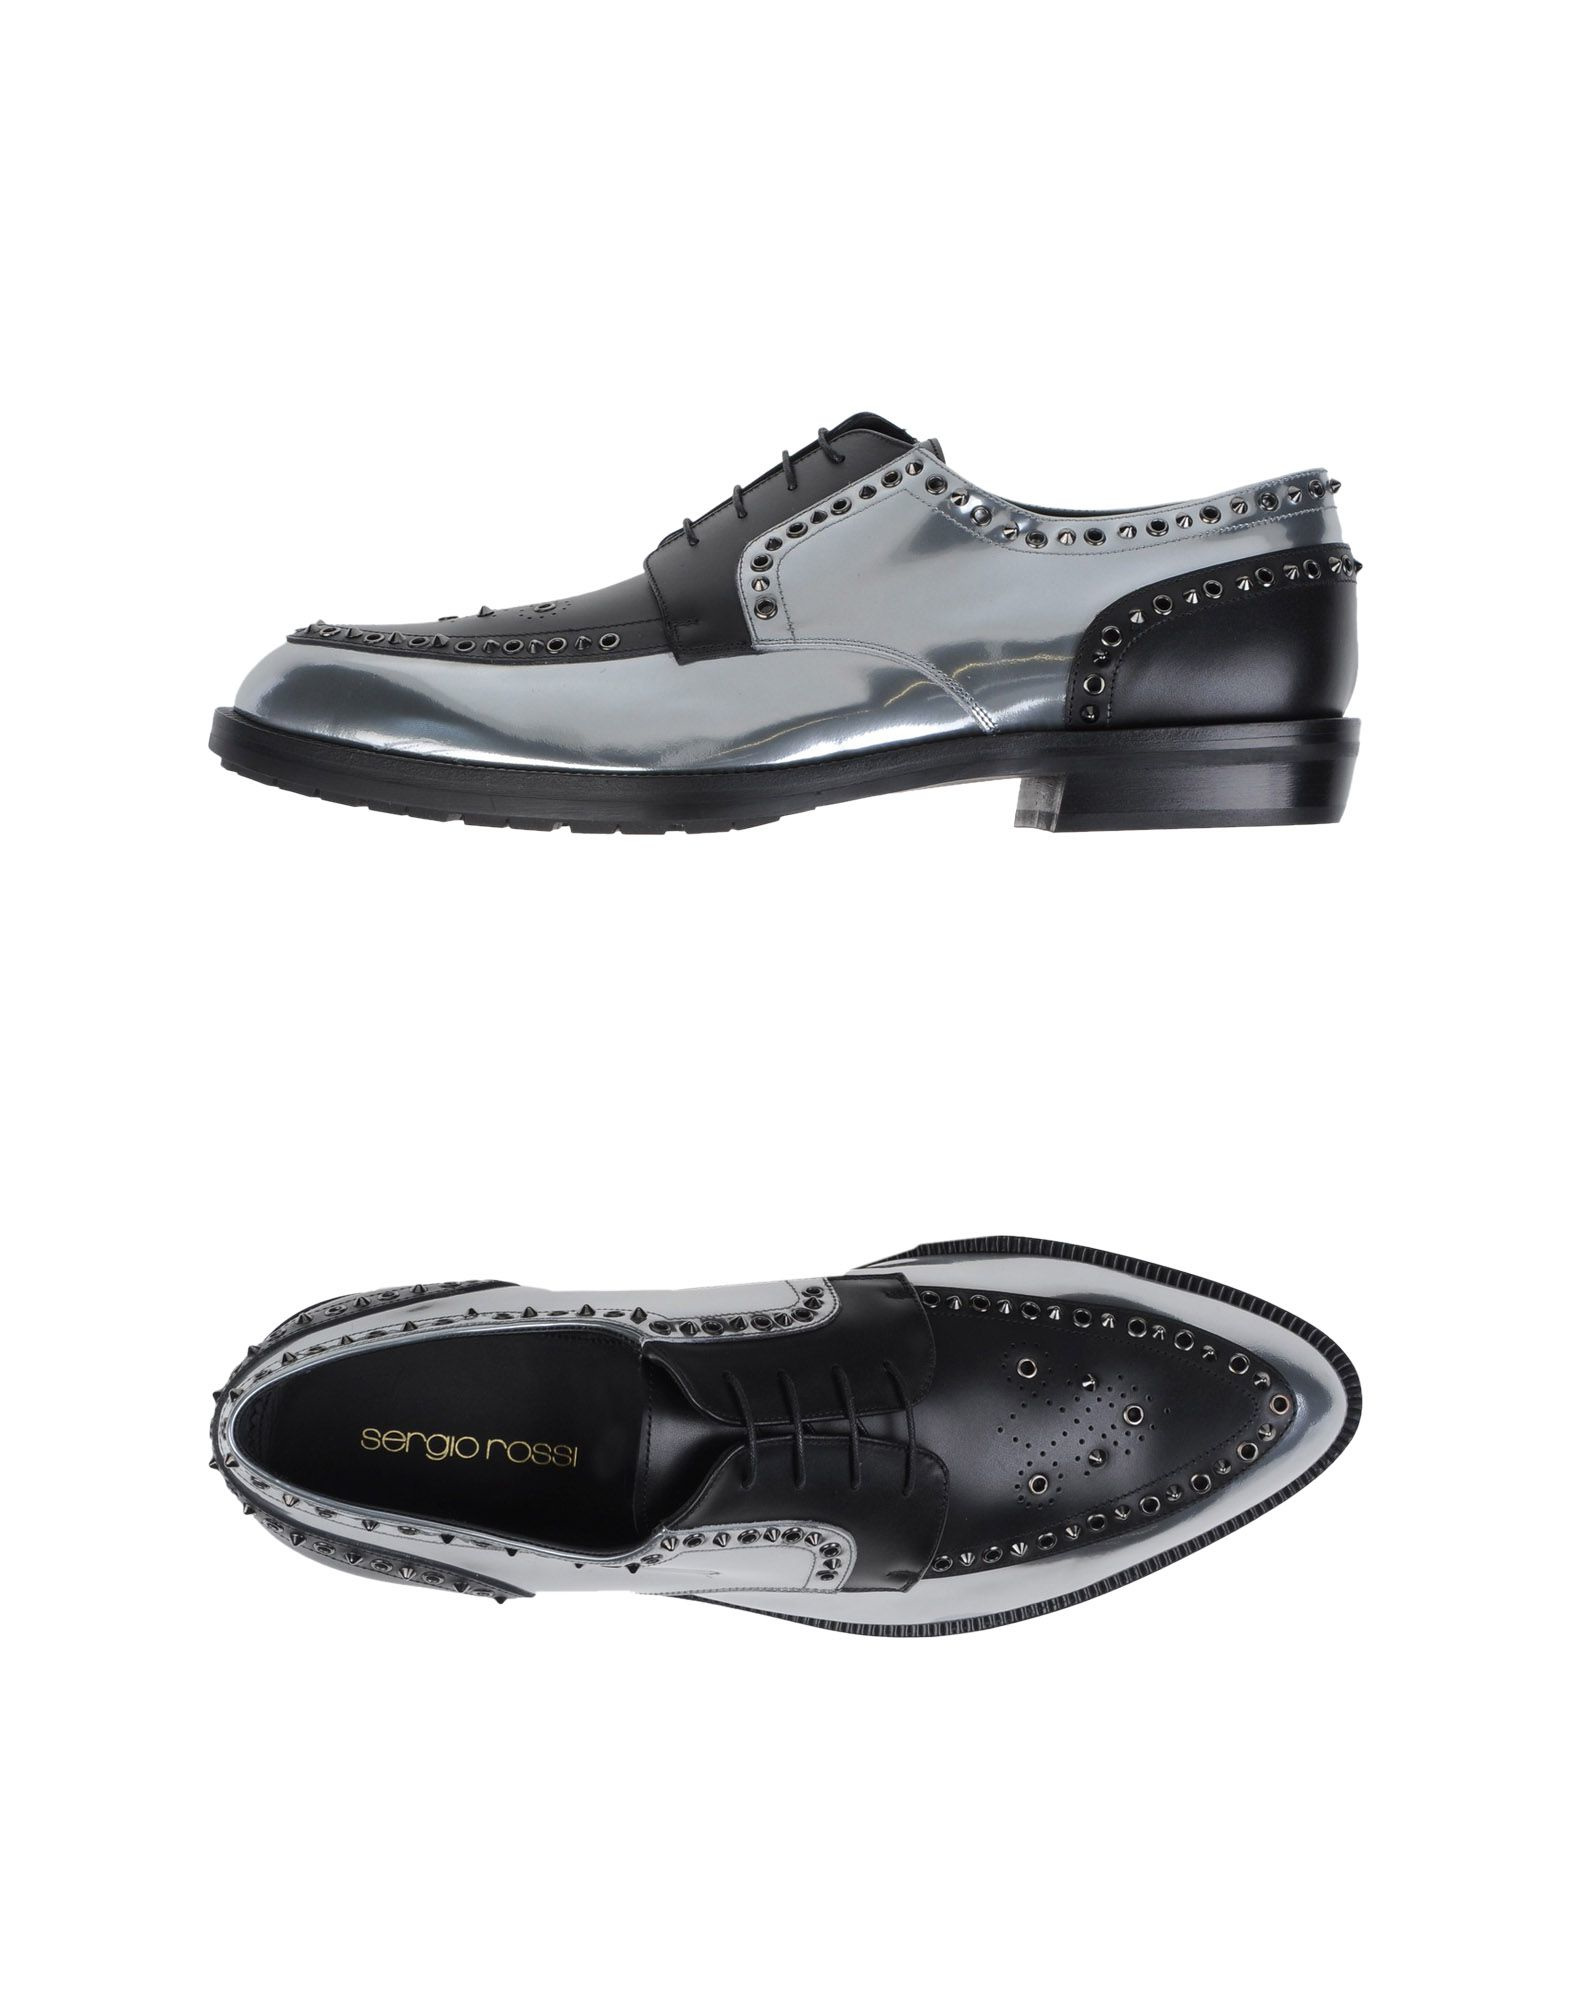 Lyst - Sergio Rossi Lace-up Shoes in Metallic for Men